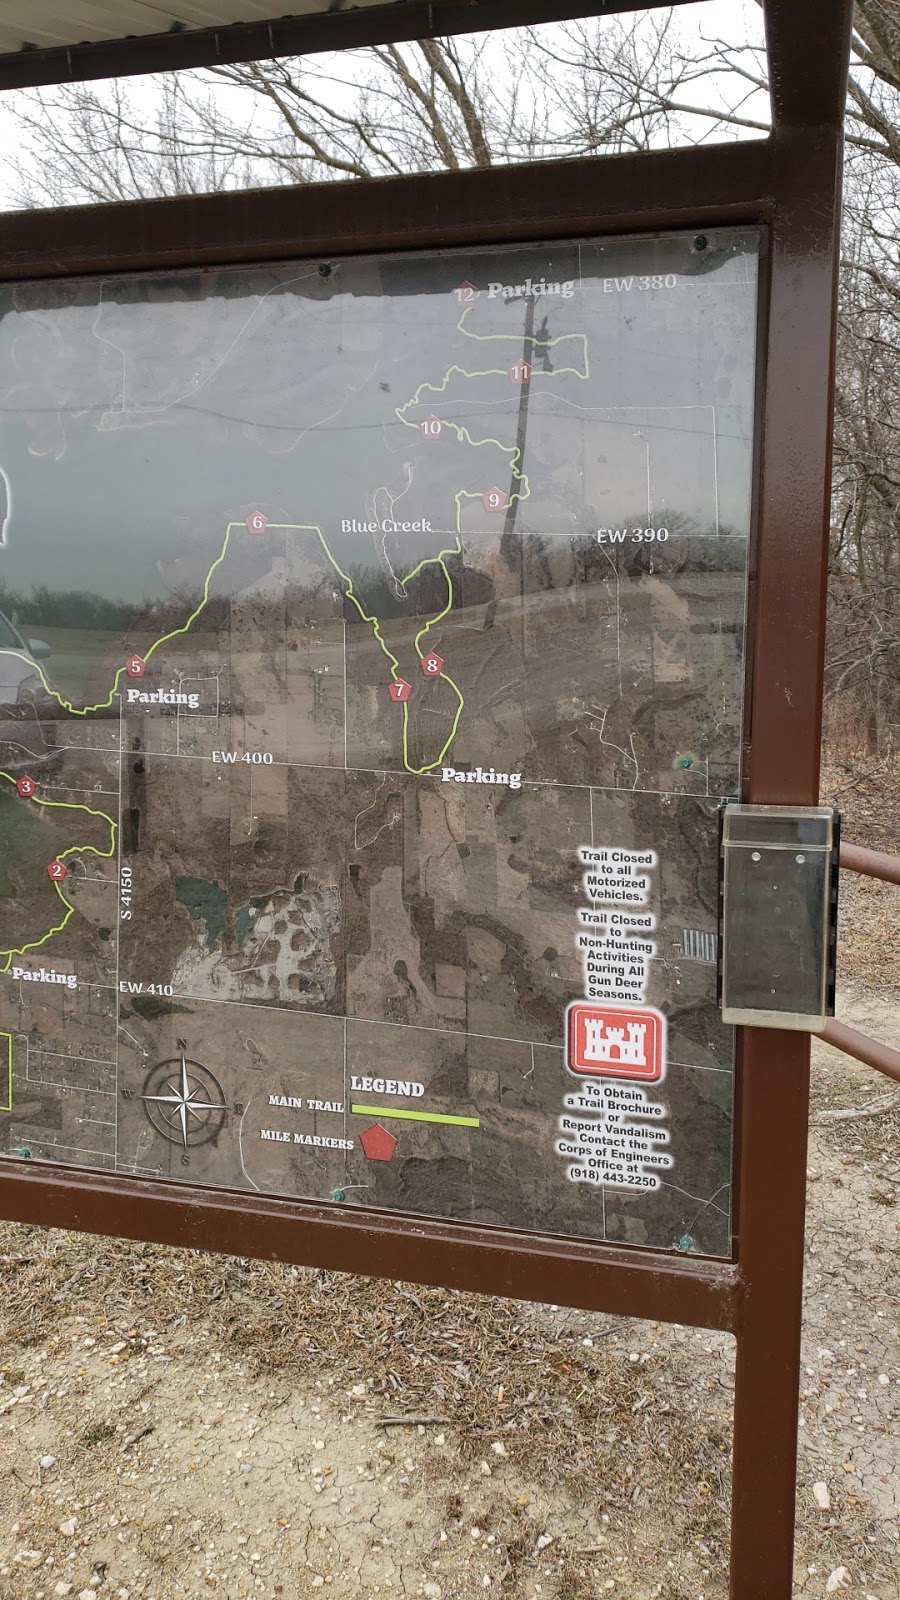 Will Rogers Country Centennial Trail | 10836 OK-88, Claremore, OK 74017 | Phone: (918) 443-2250